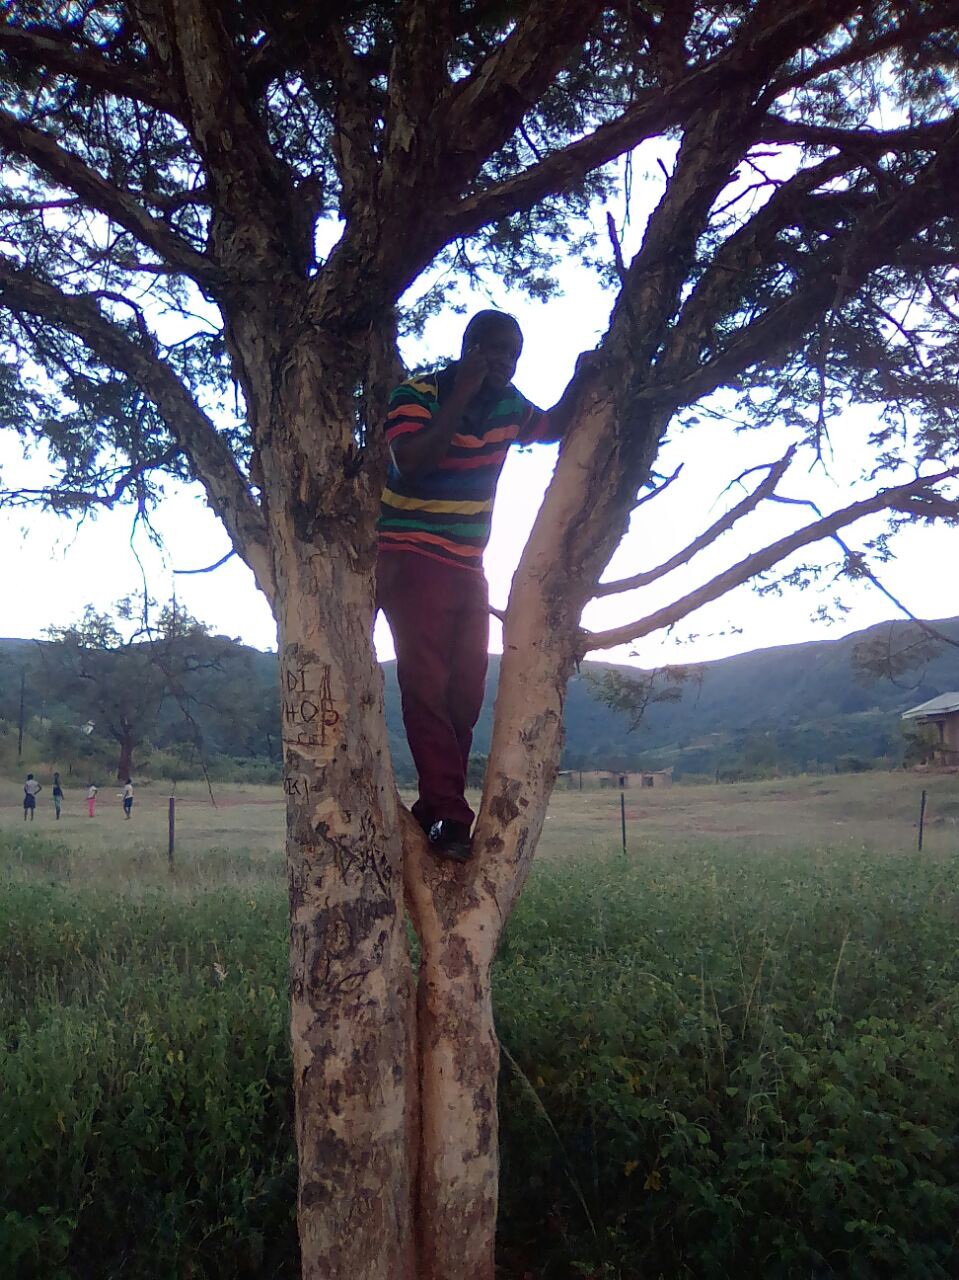 A villager trying to make a phone call on top of a tree. Pic Armando Chikhudo.Photo by 